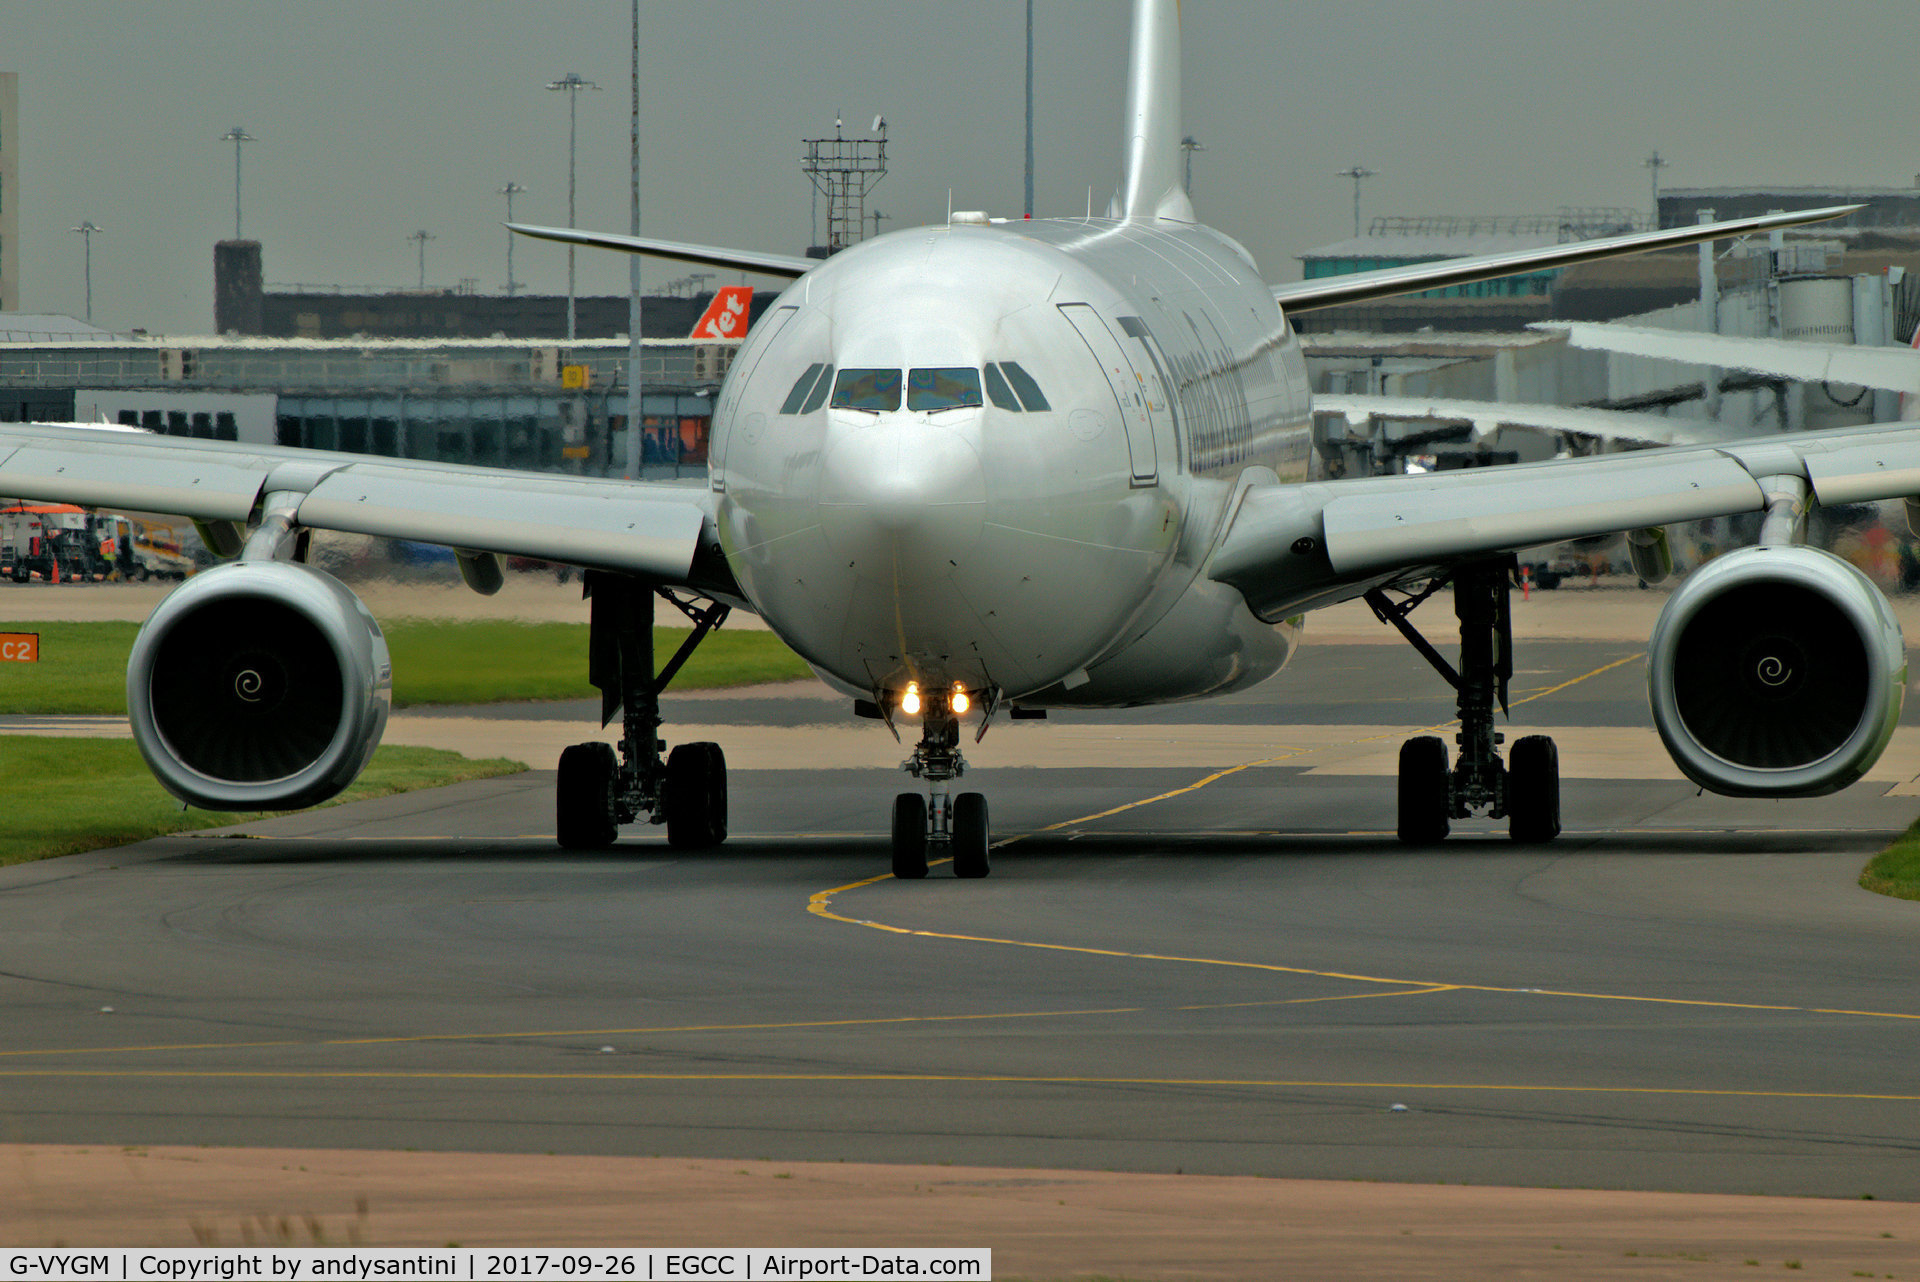 G-VYGM, 2015 Airbus A330-243 C/N 1601, taxing out for take off